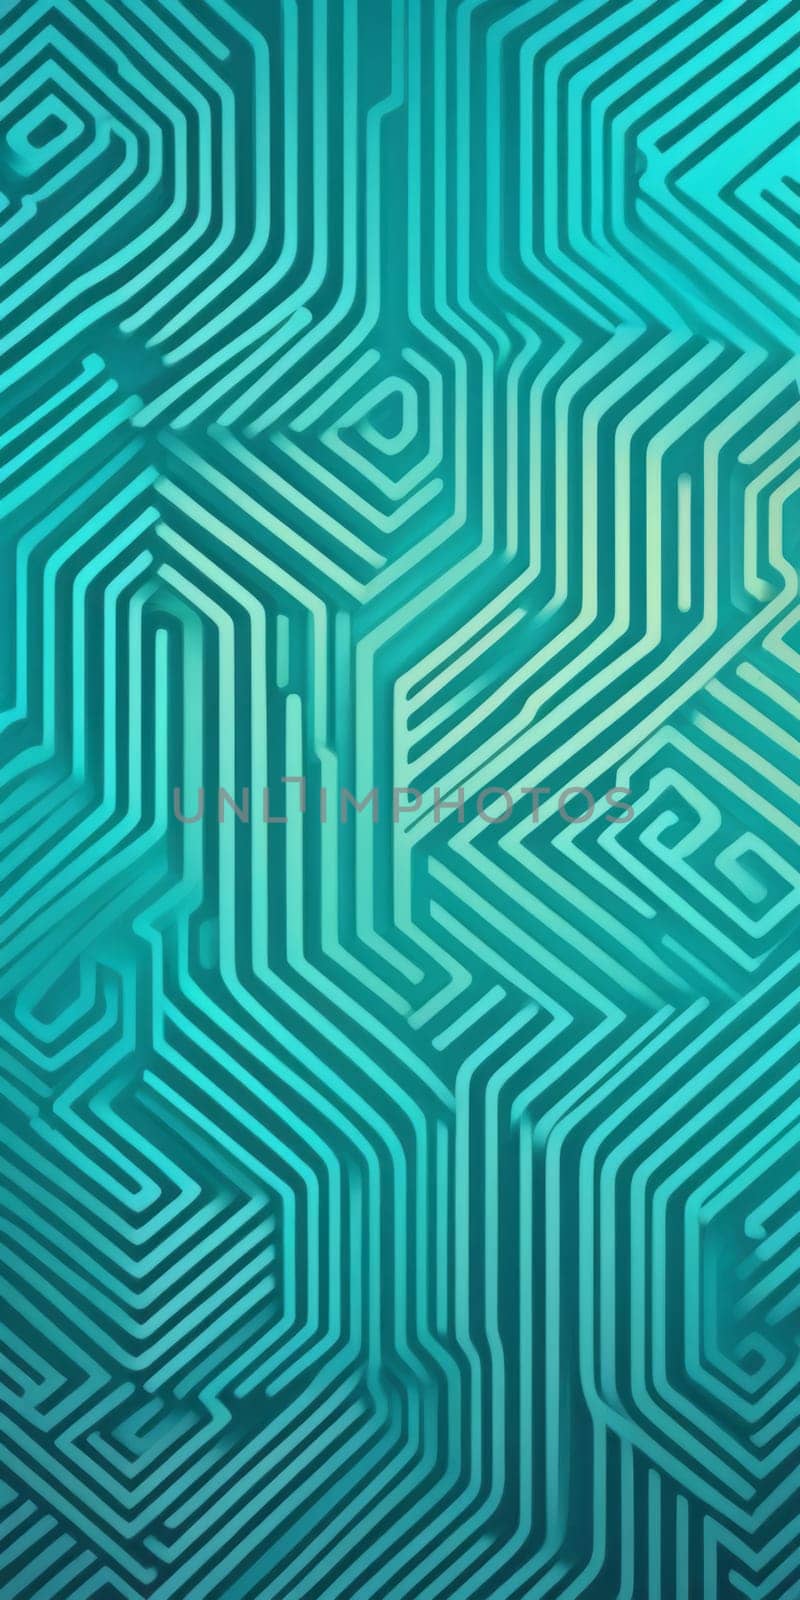 Labyrinth Shapes in Teal and Turquoise by nkotlyar